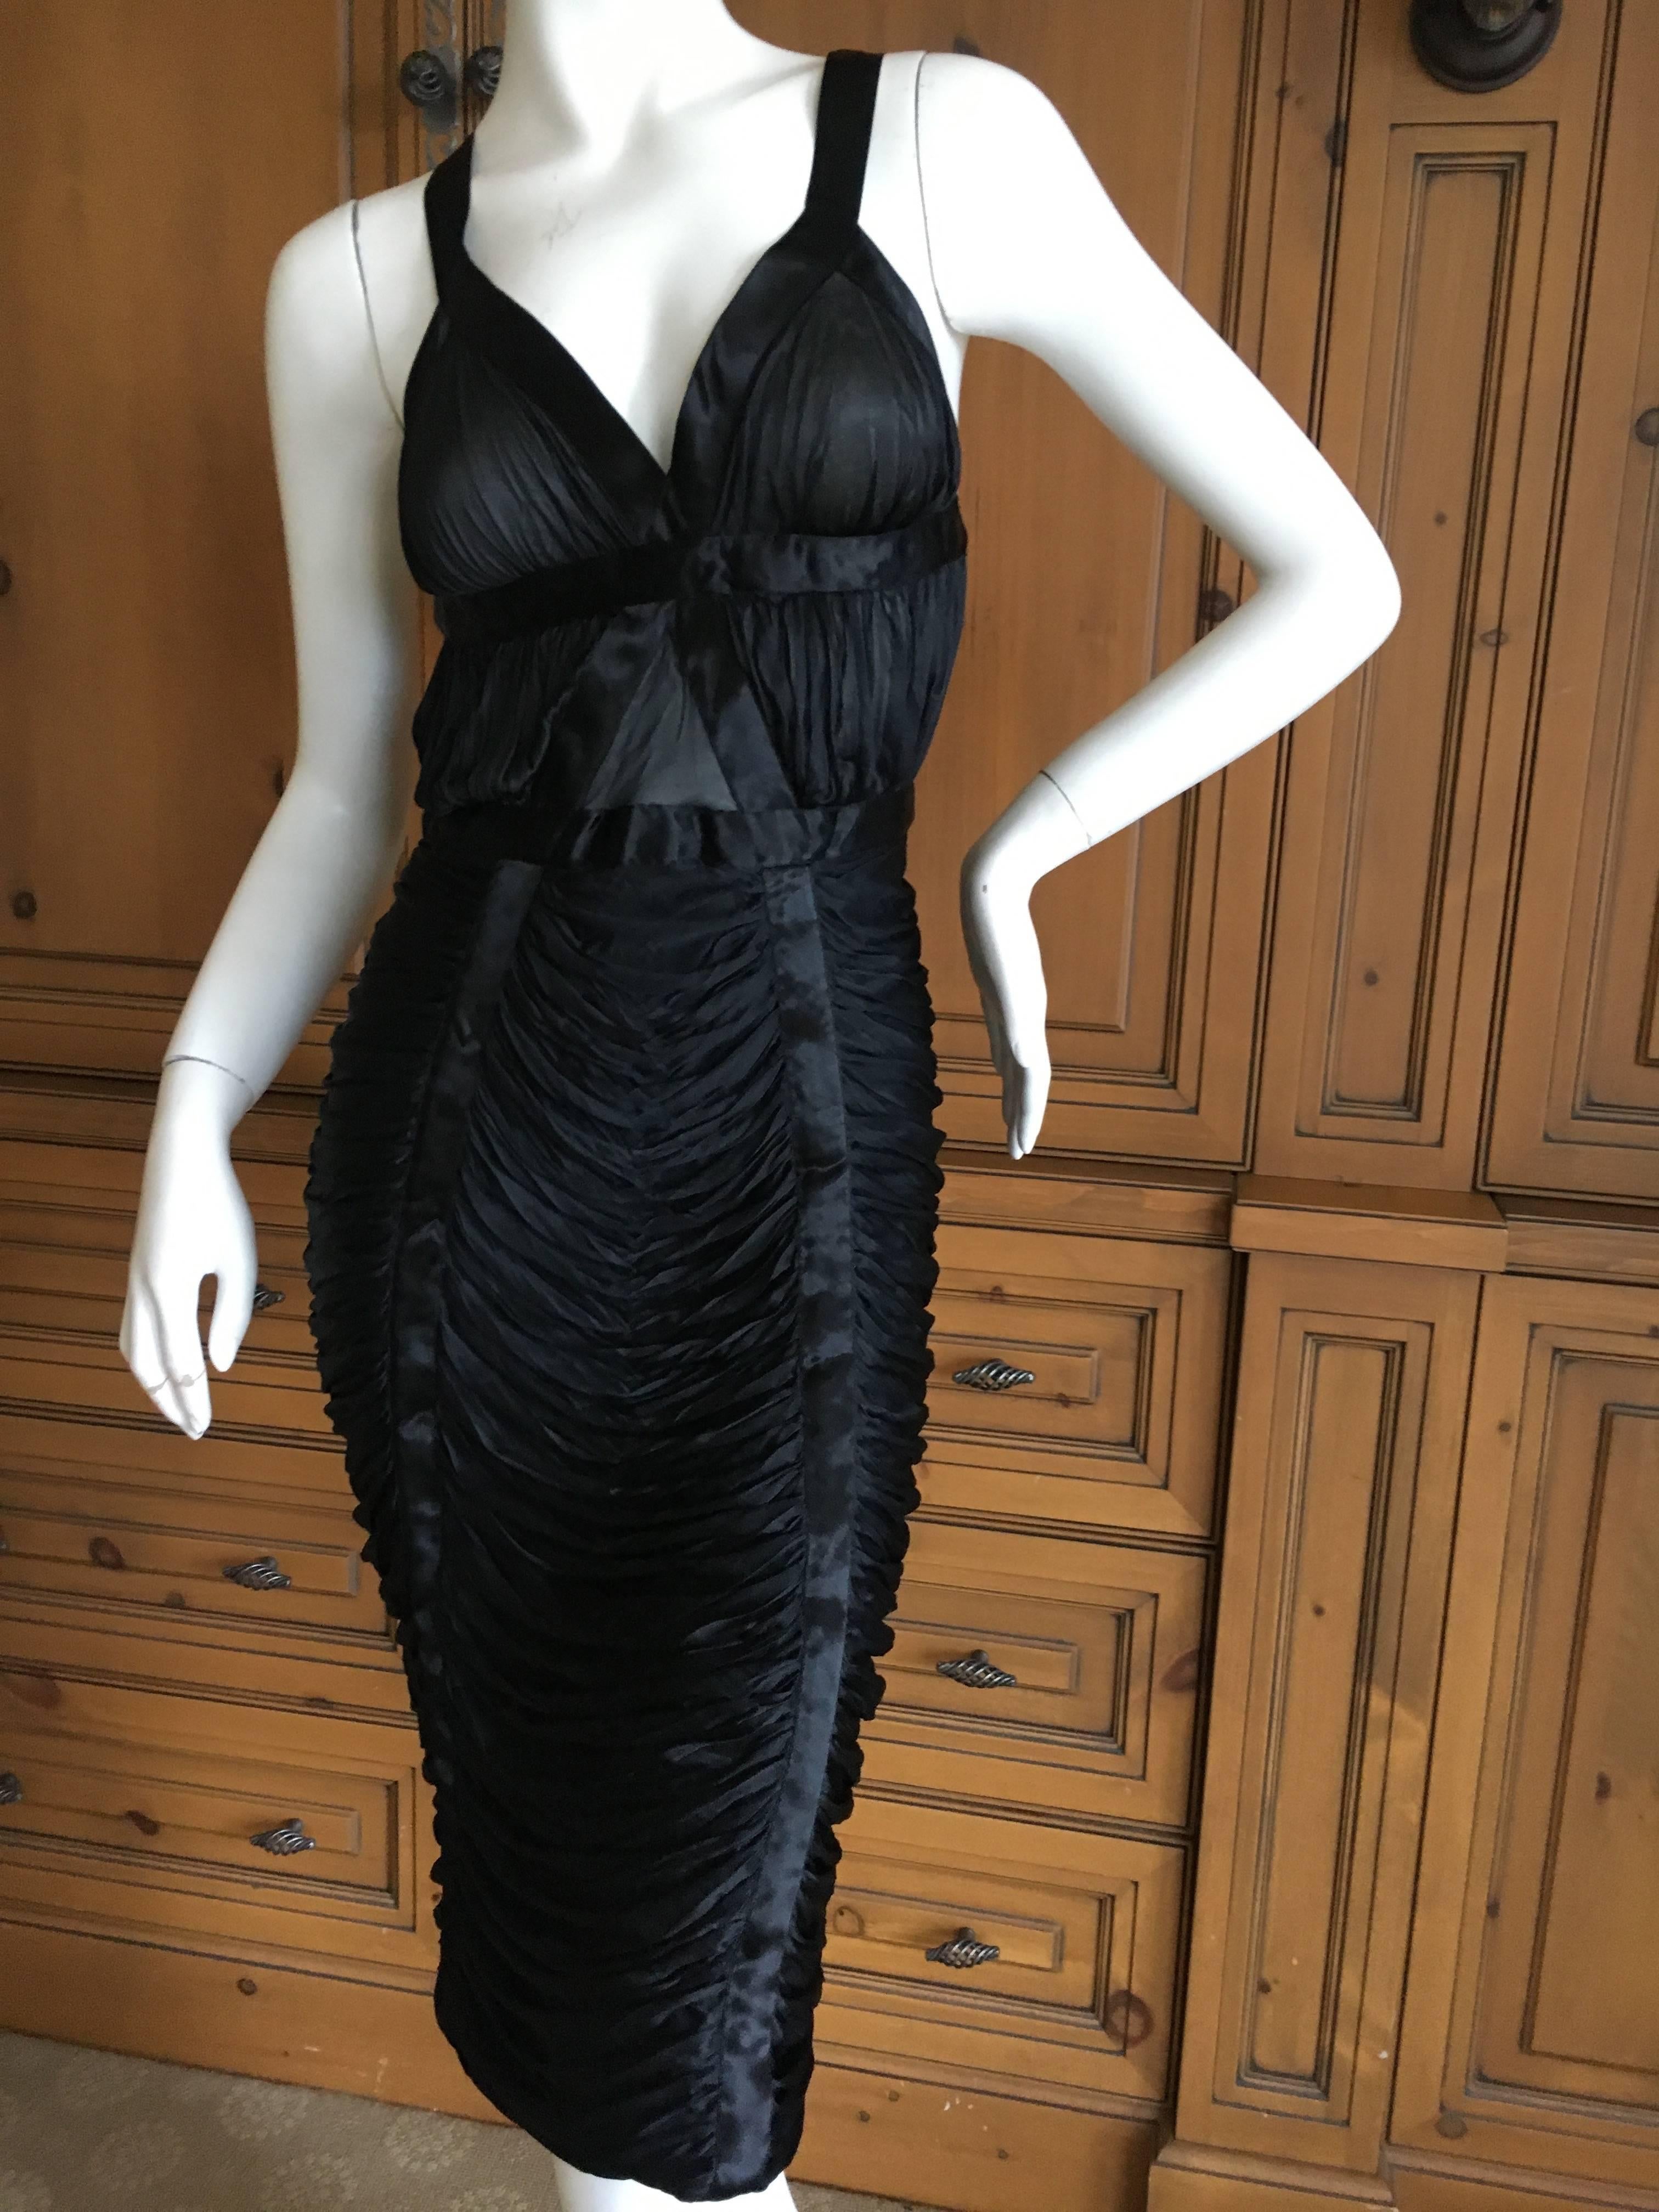 Yves Saint Laurent by Tom Ford Black Draped Cocktail Dress 2003 
Size Small
Bust 34